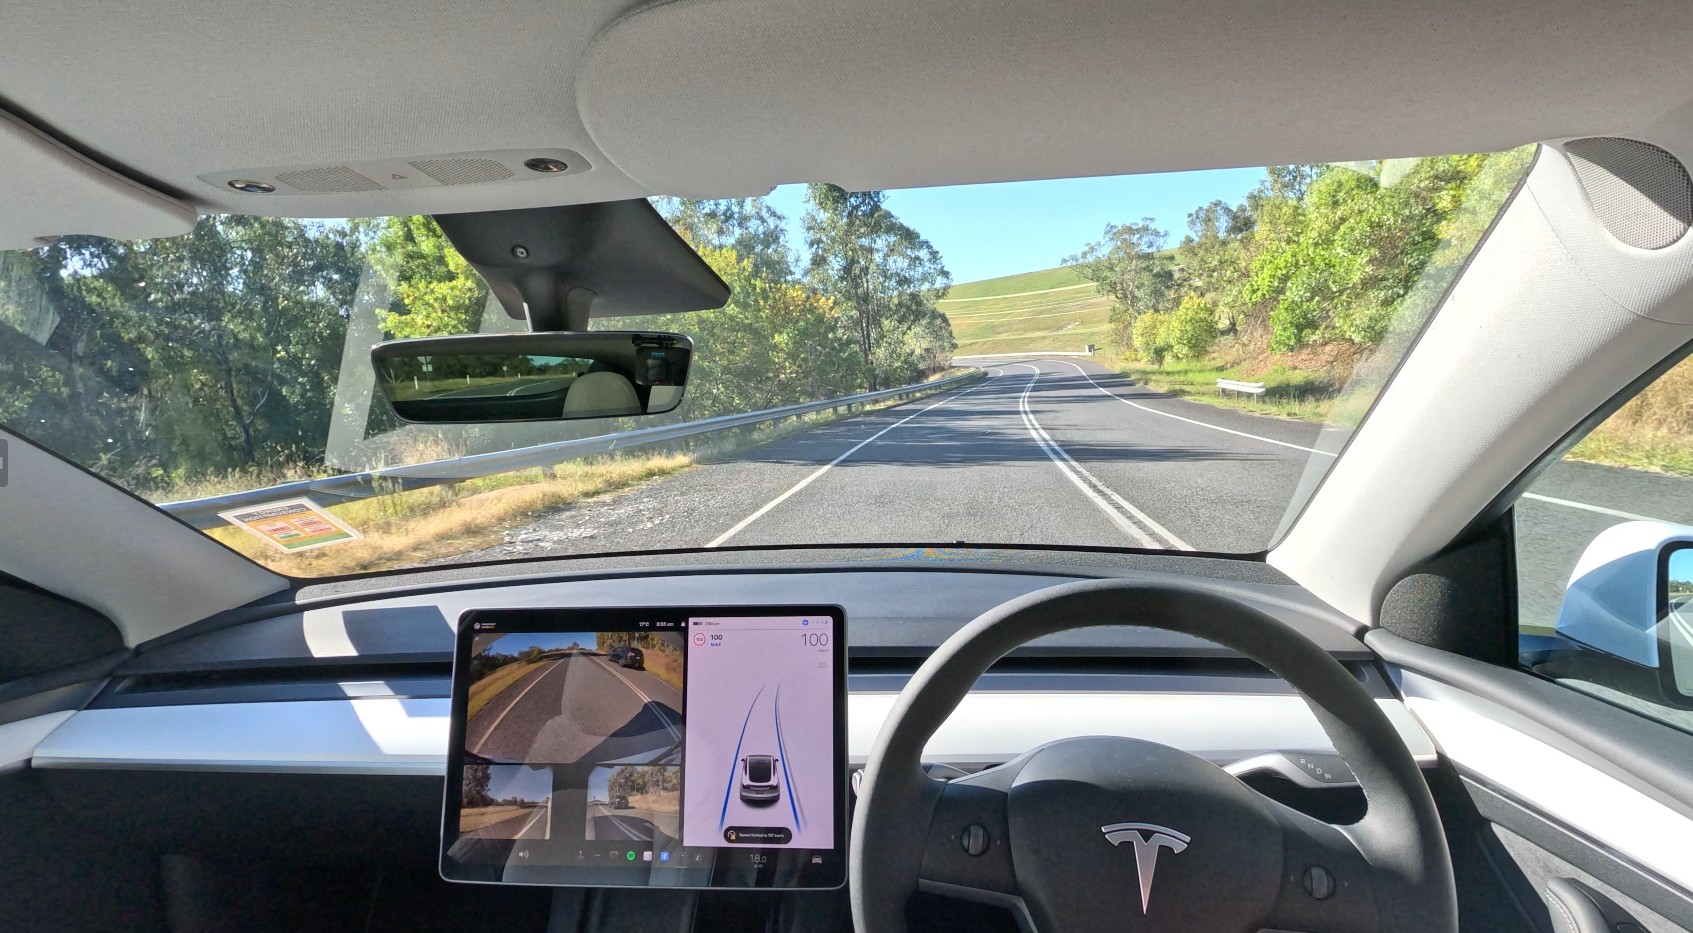 GreenTheOnly rides in a Tesla for almost 1,000km in ‘Elon Mode’. With nag disabled, experiences the future with driver monitoring thumbnail